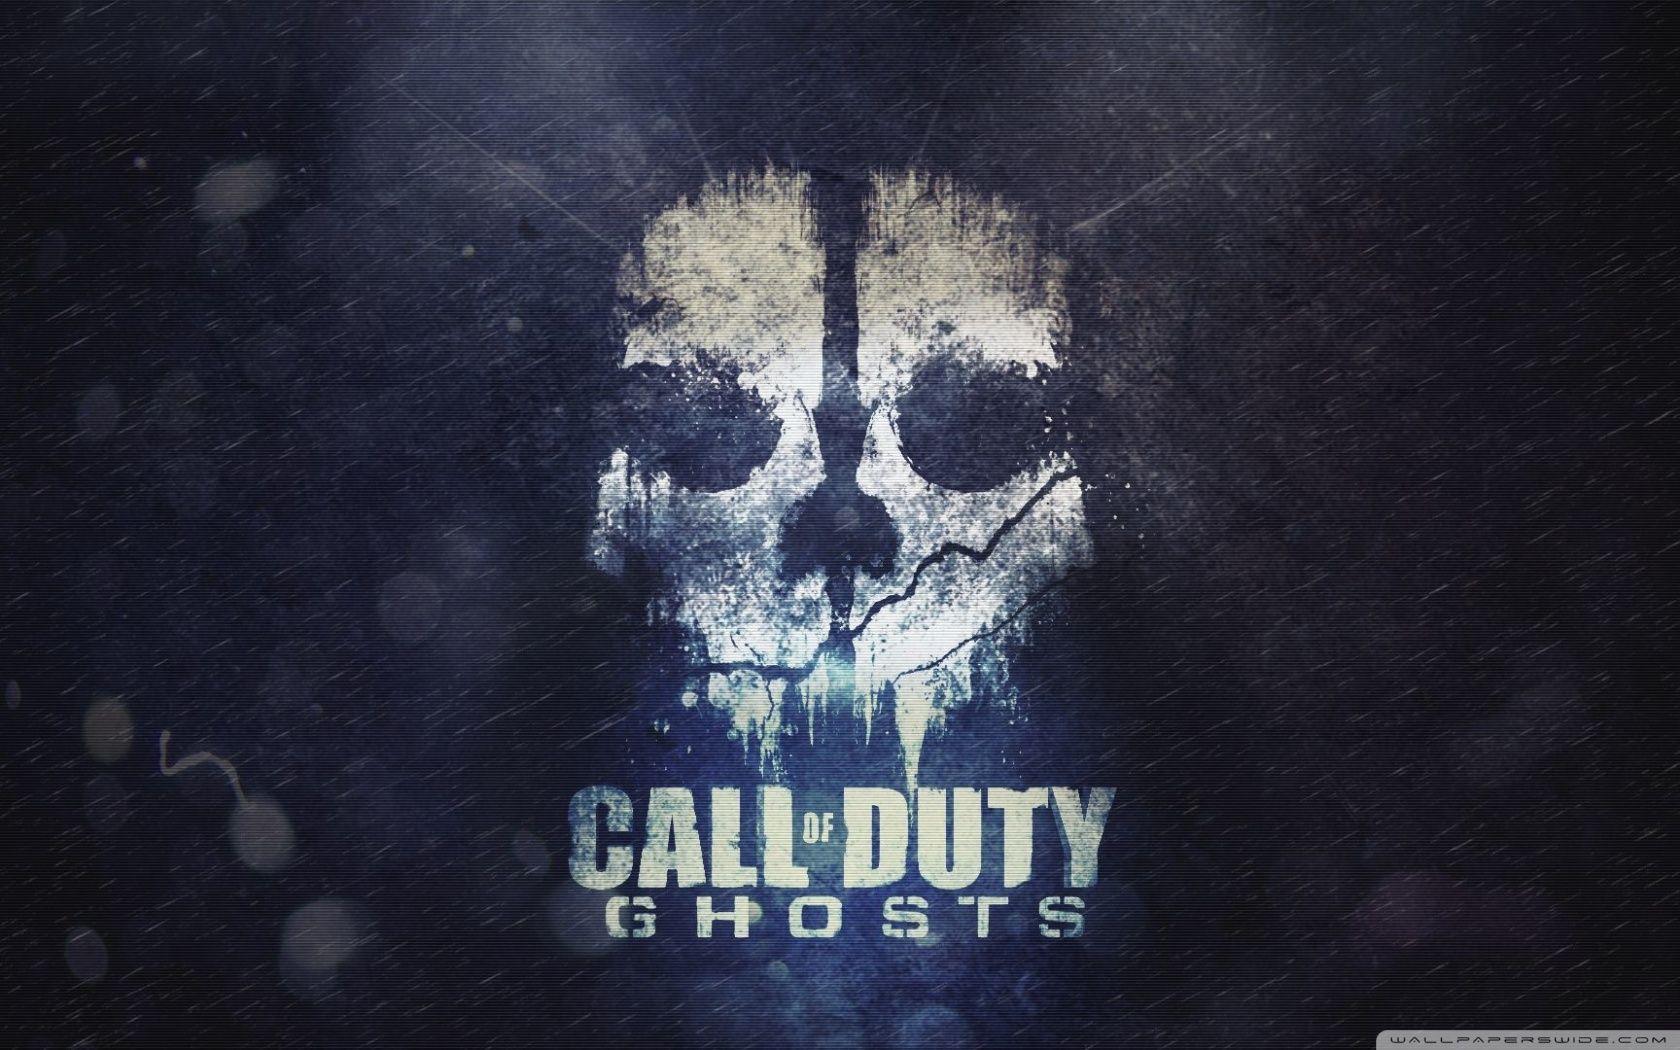 Wallpaper  1920x1080 px Call of Duty Call of Duty Ghosts 1920x1080   wallup  660927  HD Wallpapers  WallHere